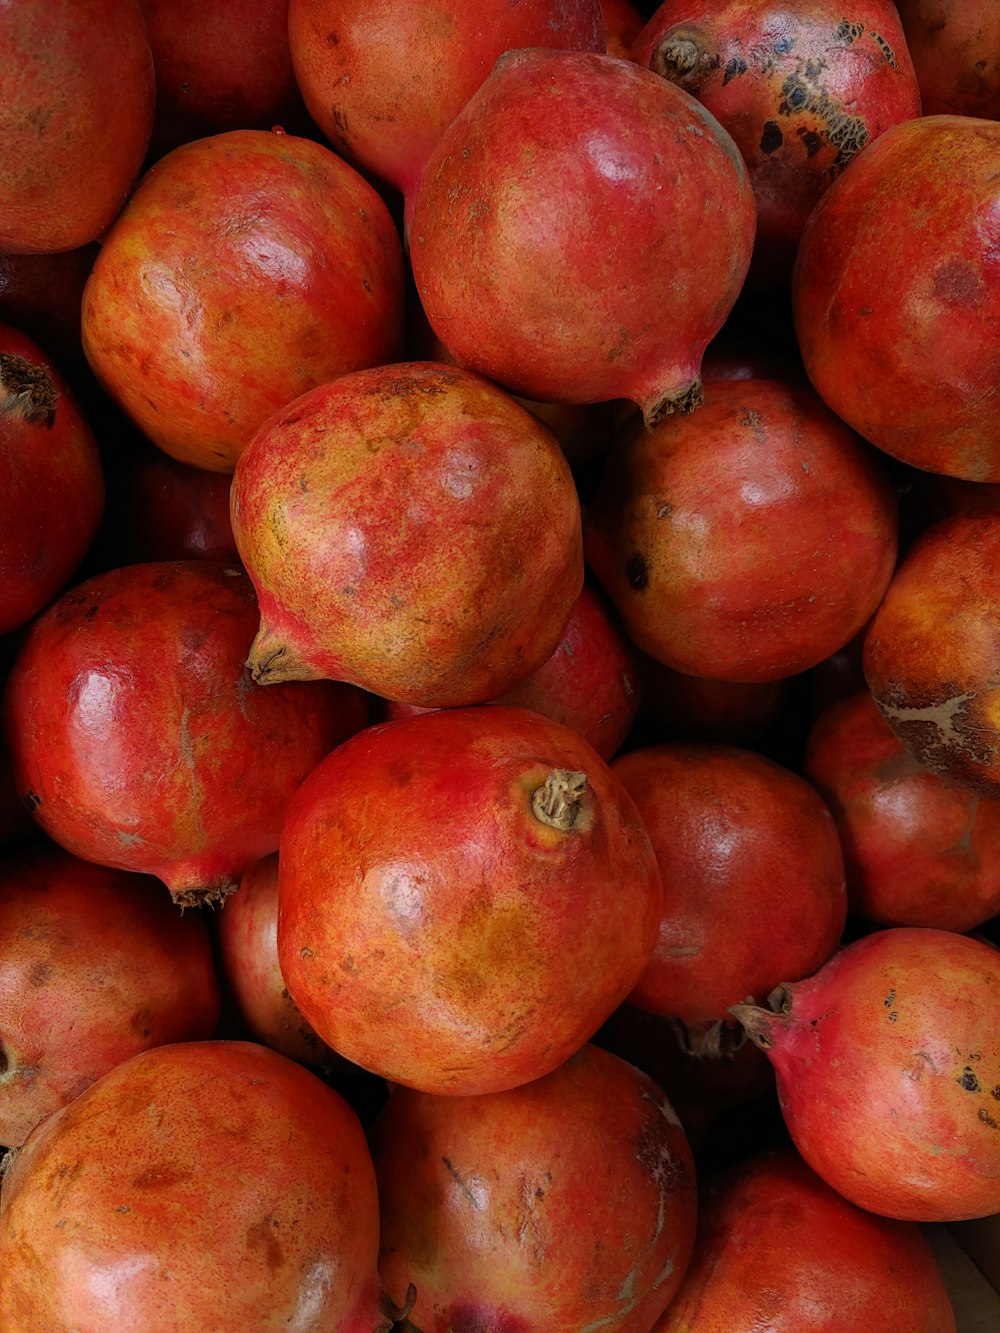 red round fruits on brown wooden table